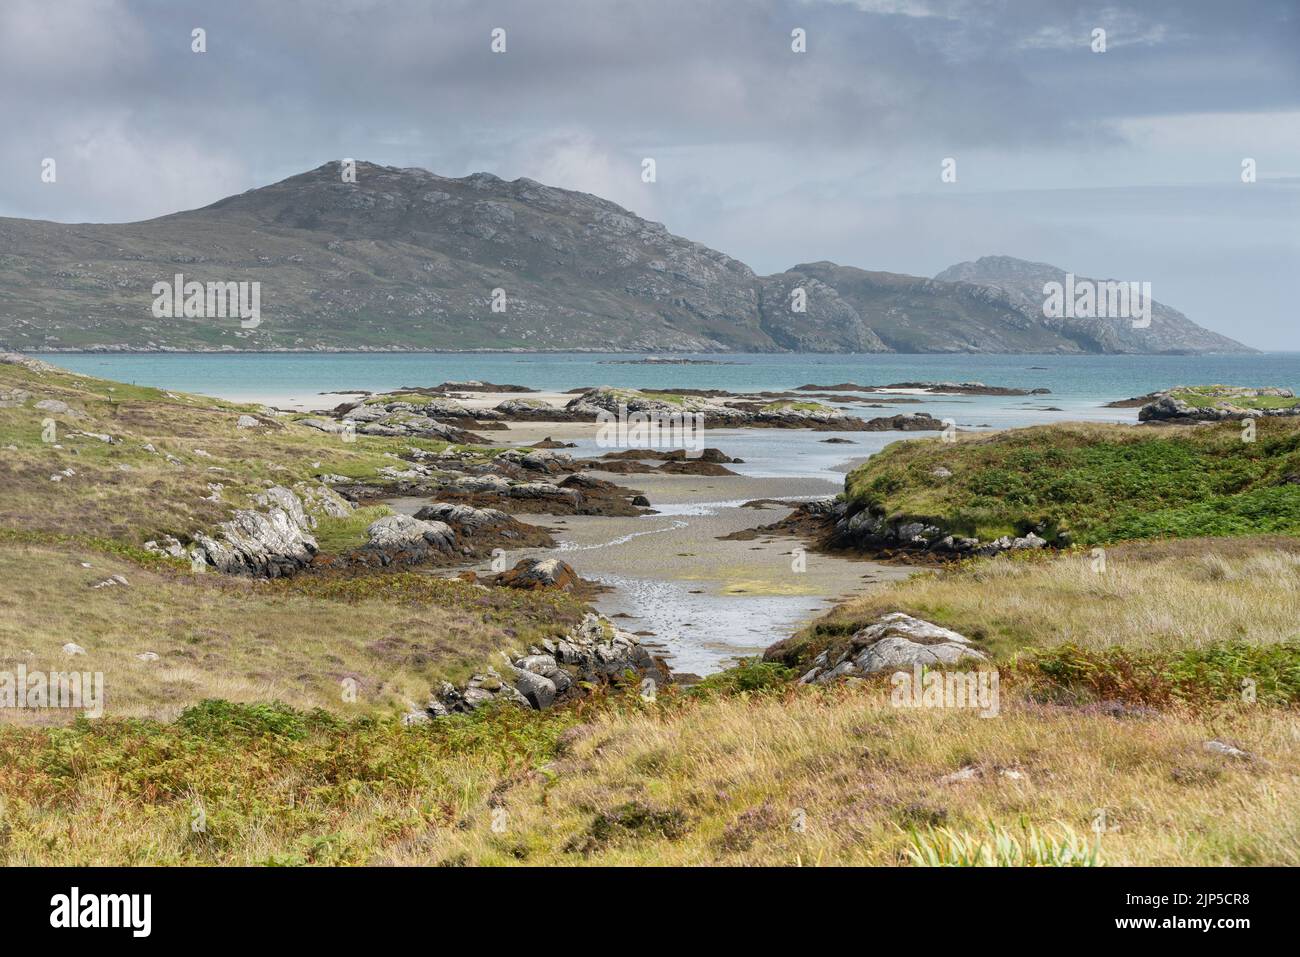 The hills of South Uist, seen from Taobh a' Chaolais, adjacent to the causeway to the Isle of Eriskay. Ròineabhal is one of the hills depicted. Stock Photo